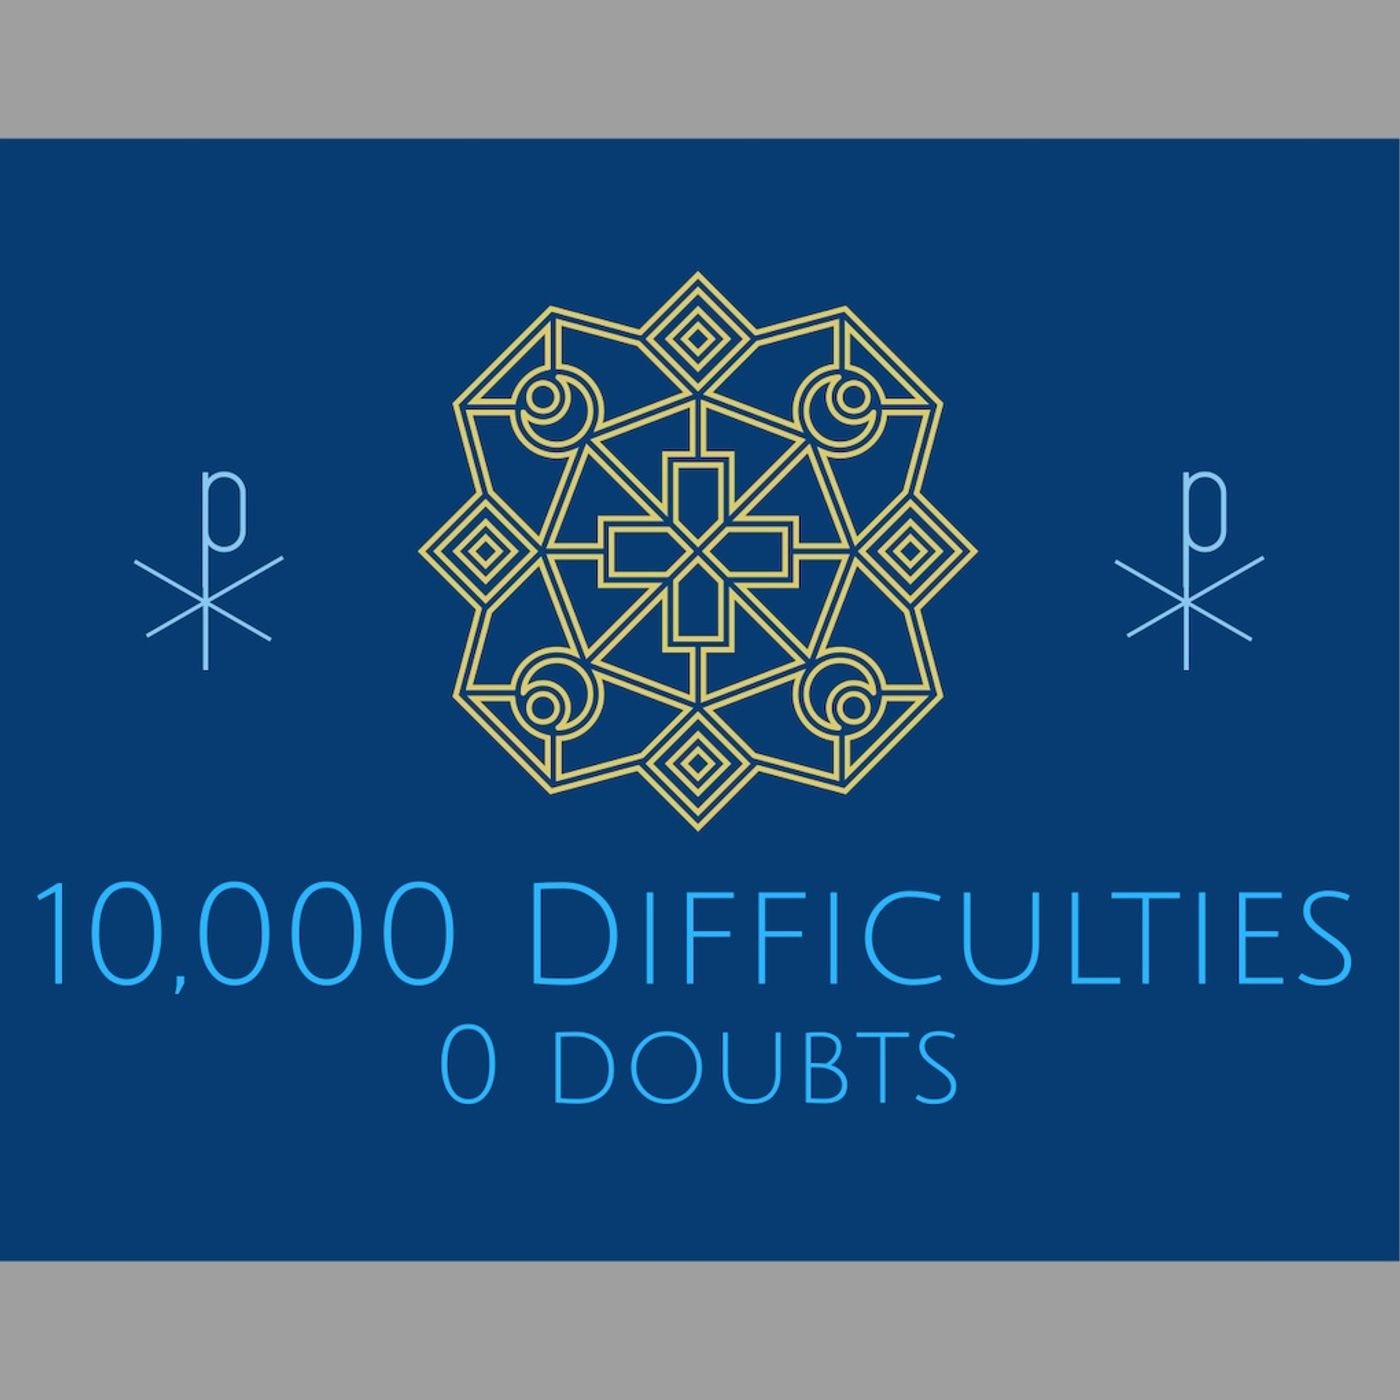 10,000 Difficulties 0 Doubts